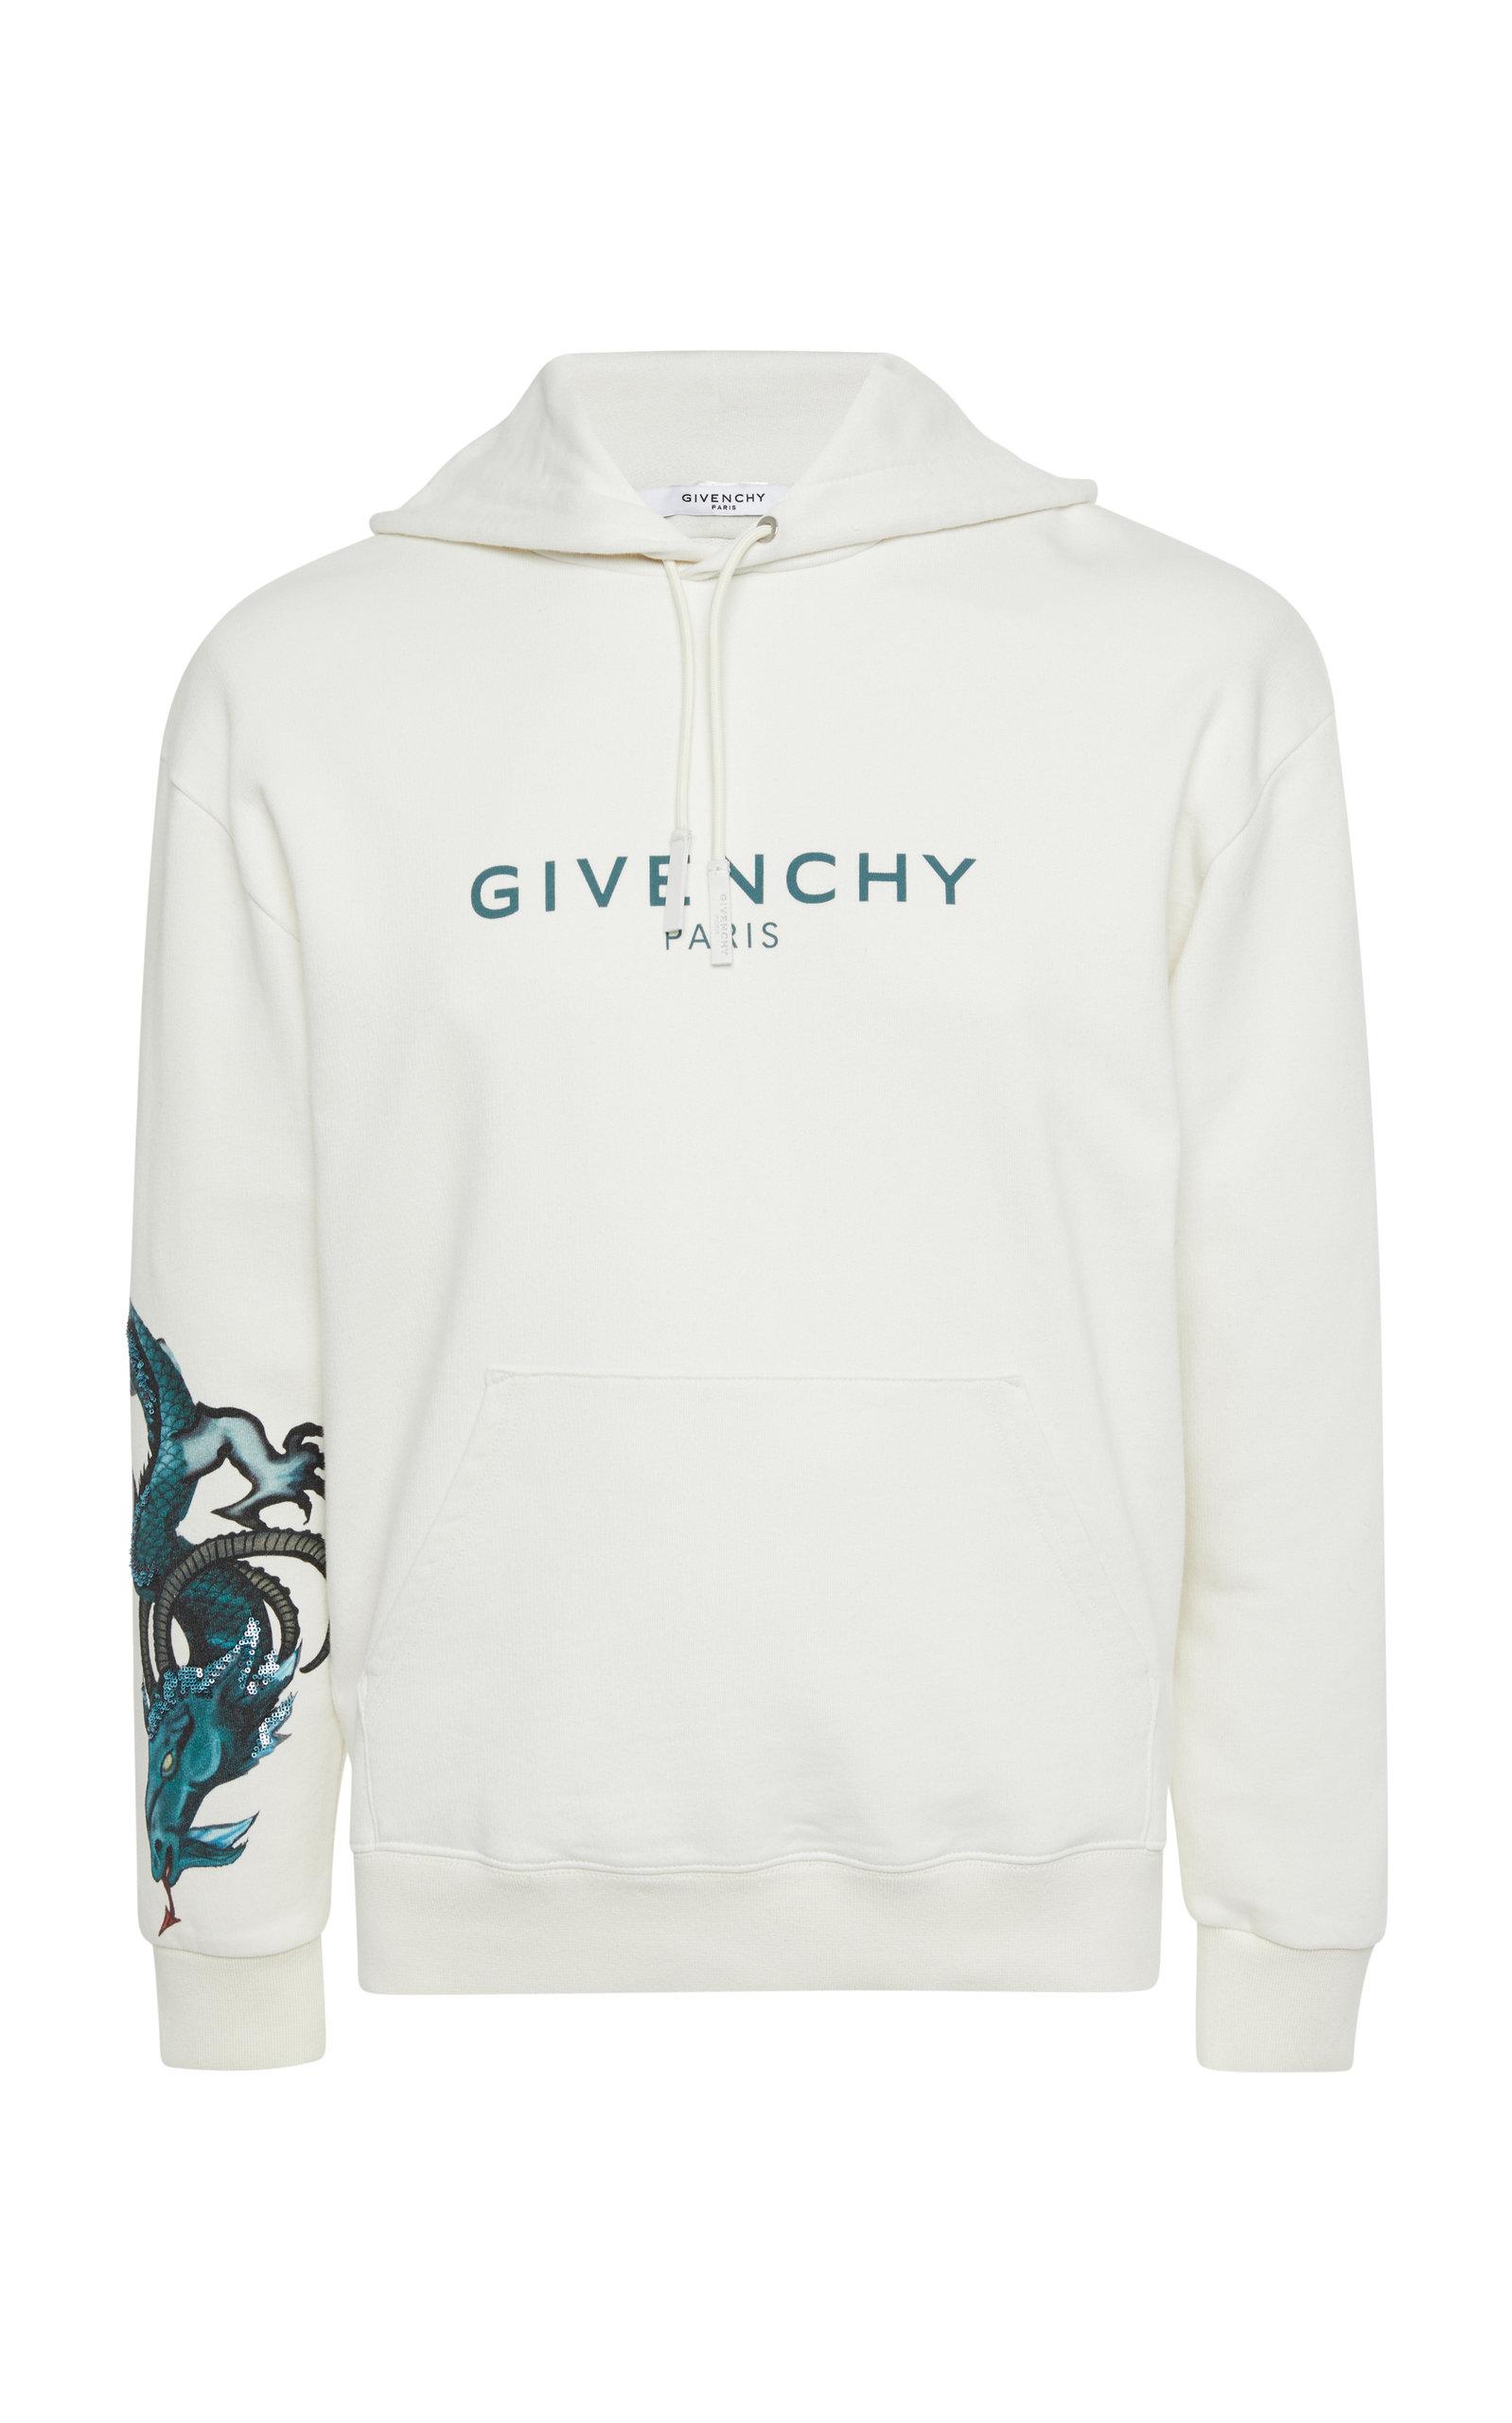 Givenchy Capricorn Cotton Logo Hoodie in White for Men - Lyst